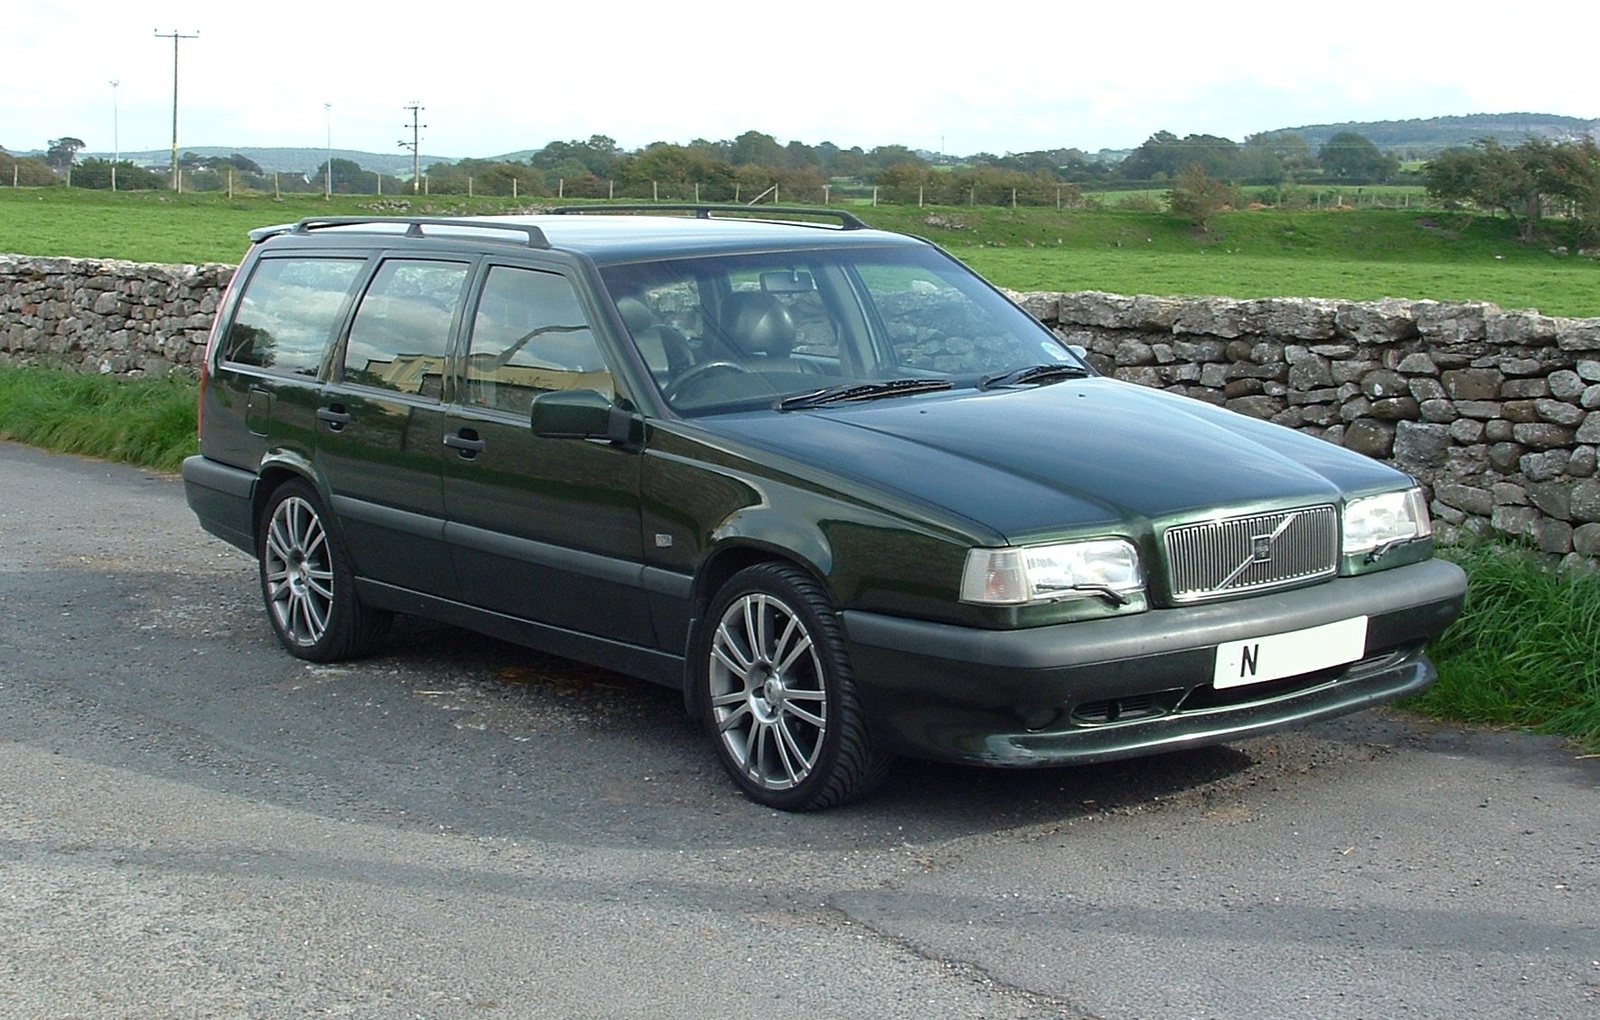 1995 Volvo 850 4 Dr T5R Turbo Wagon picture, exterior